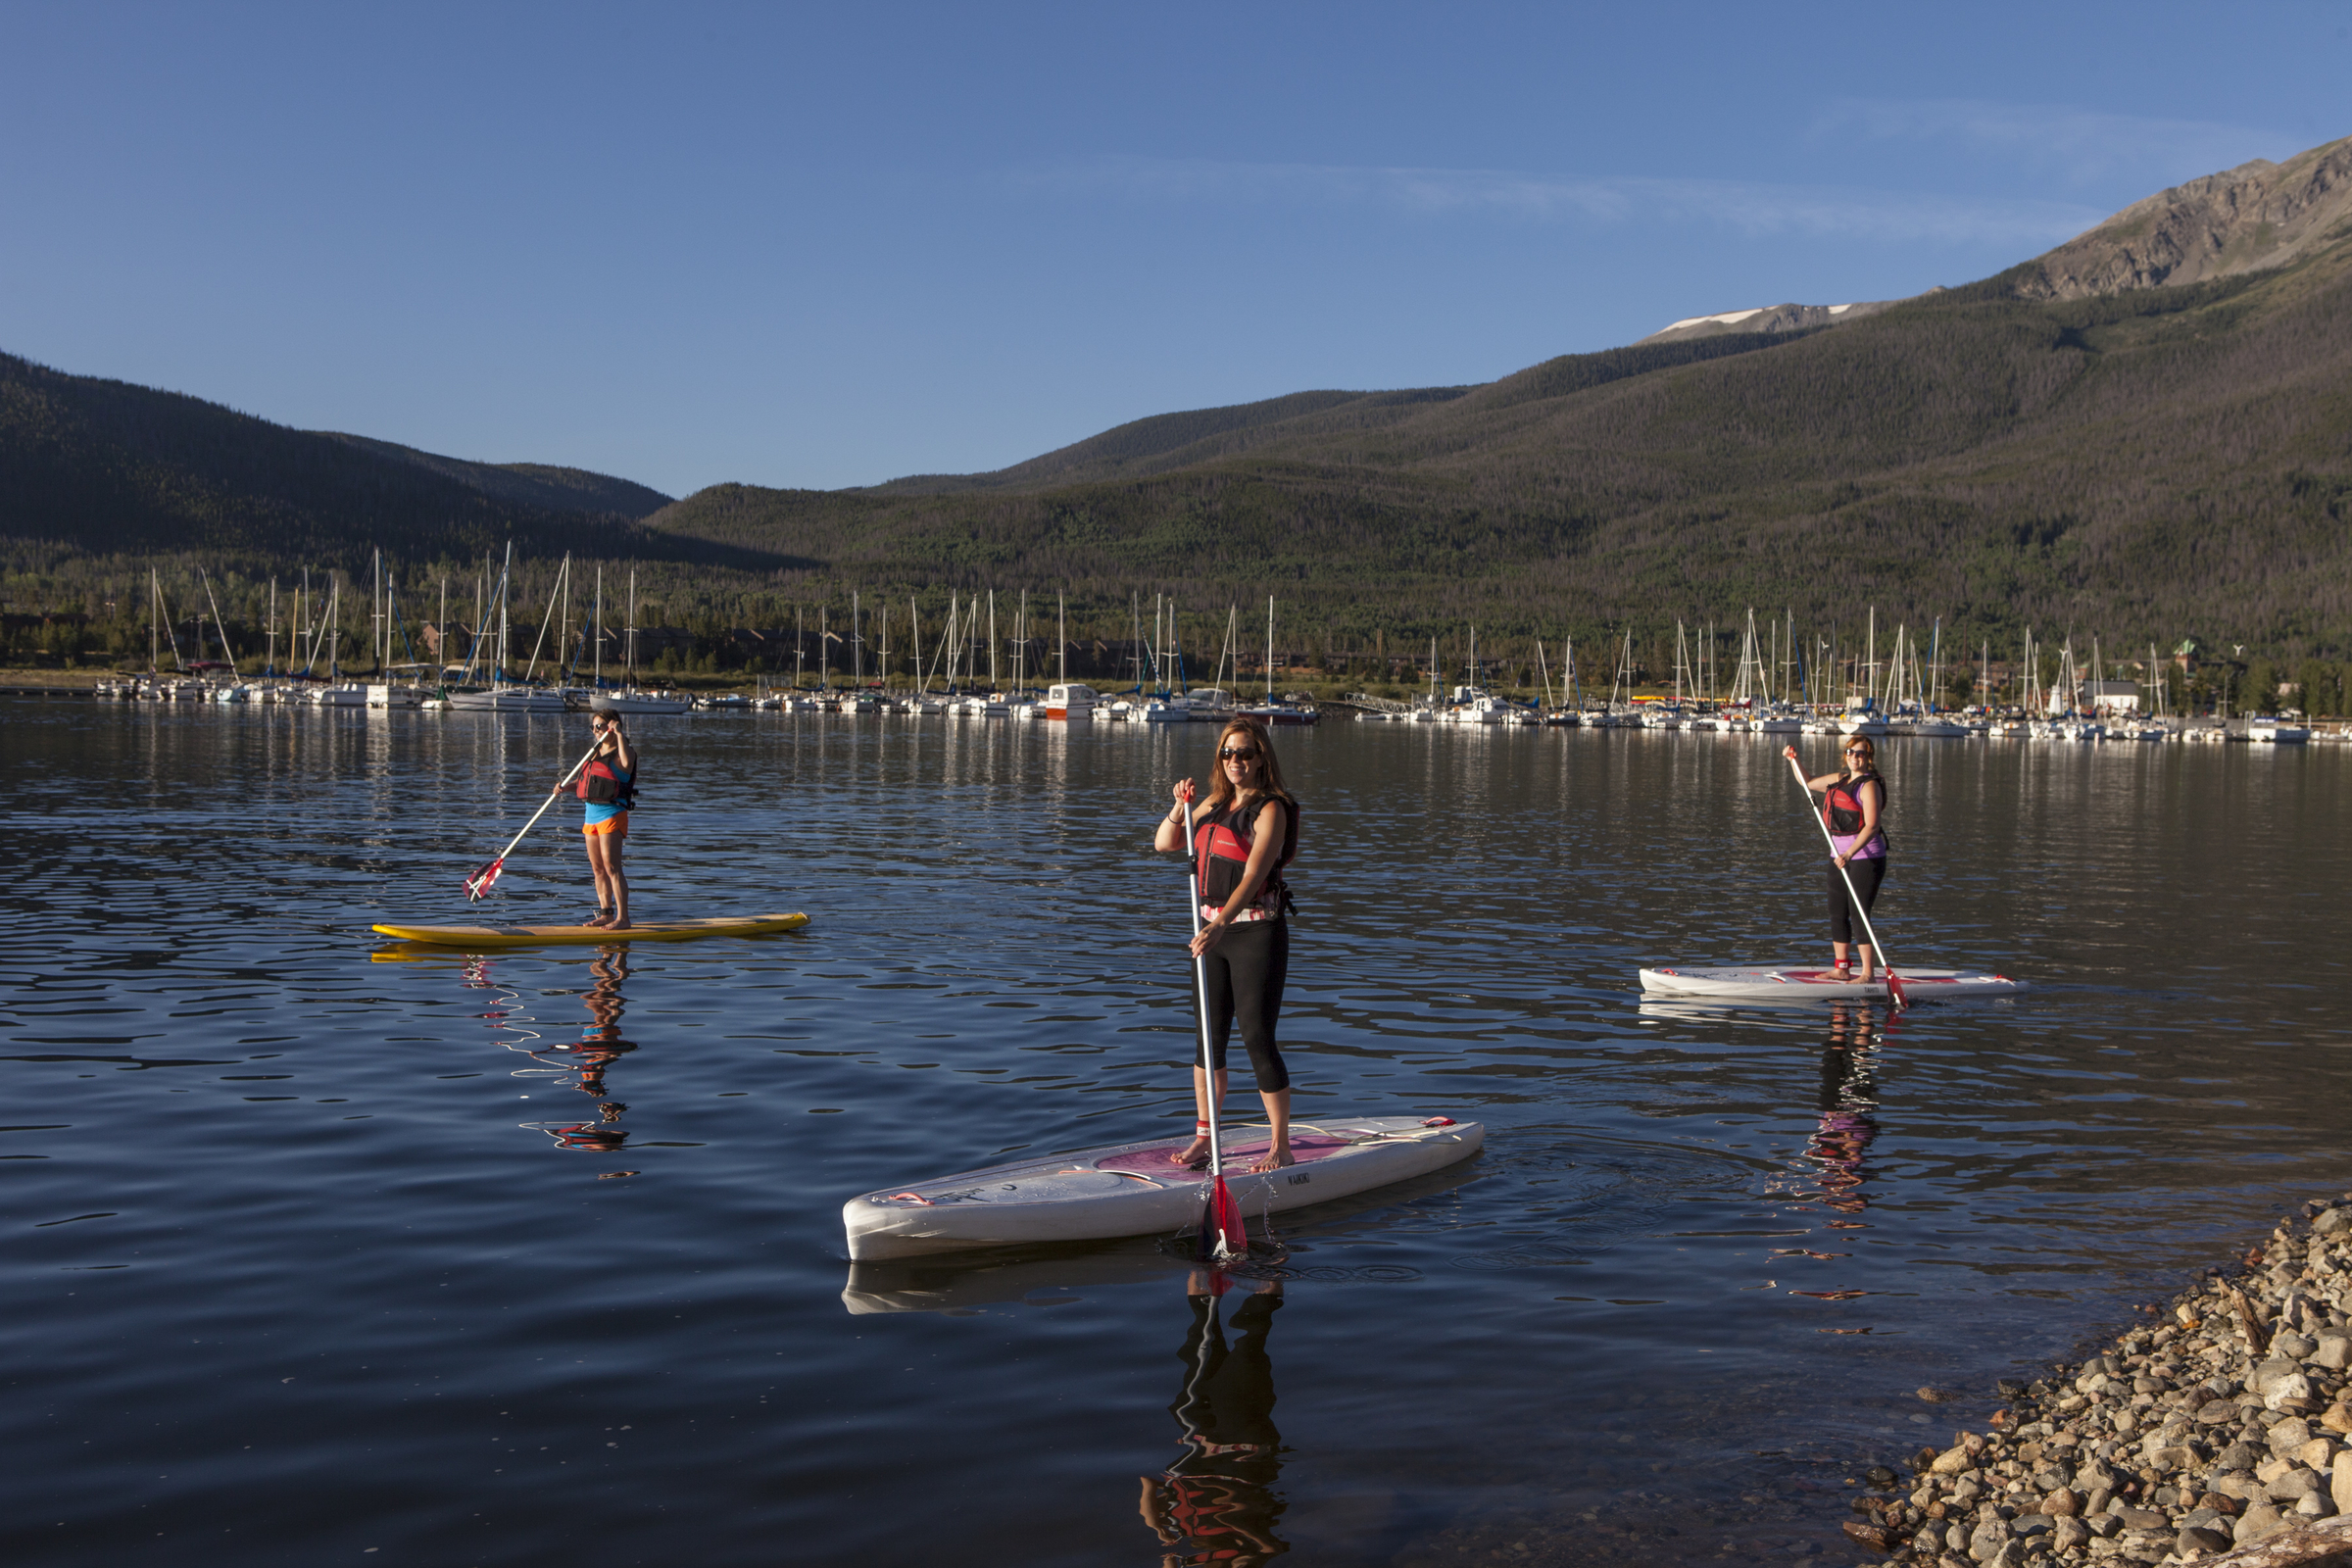 Three women on paddle boards with sail boats docked in the background.